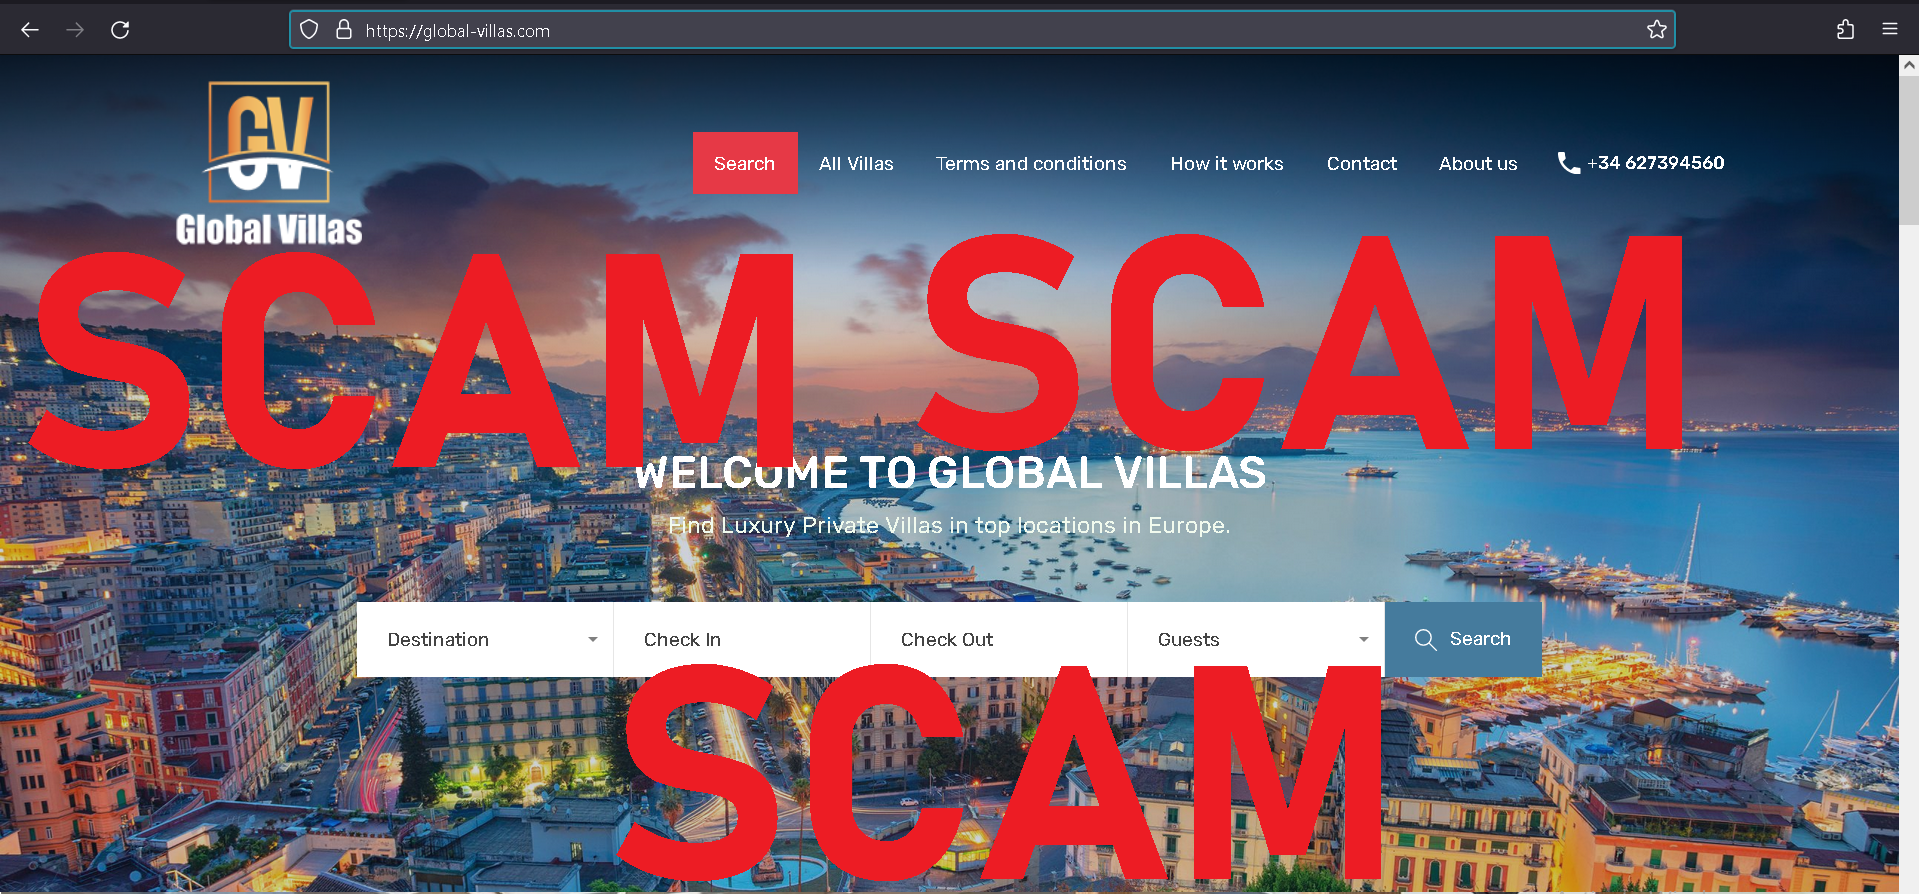 You are currently viewing Fraudulent website: global-villas.com SCAM SCAM